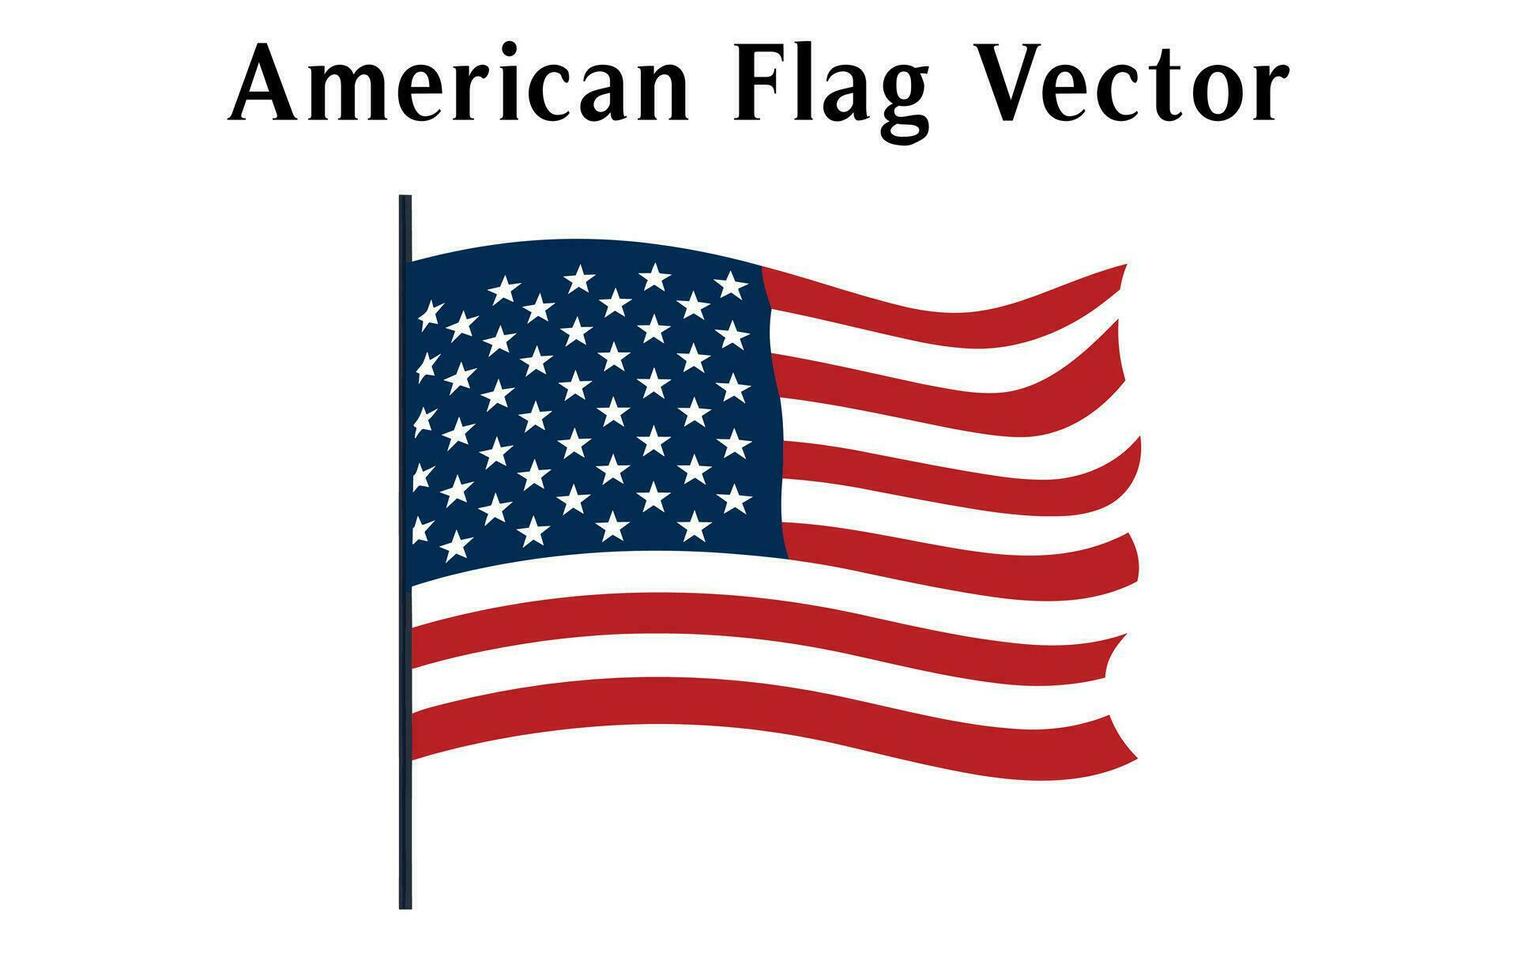 Distressed USA Flag vector illustration, American Flag vector clipart isolated on a white Background